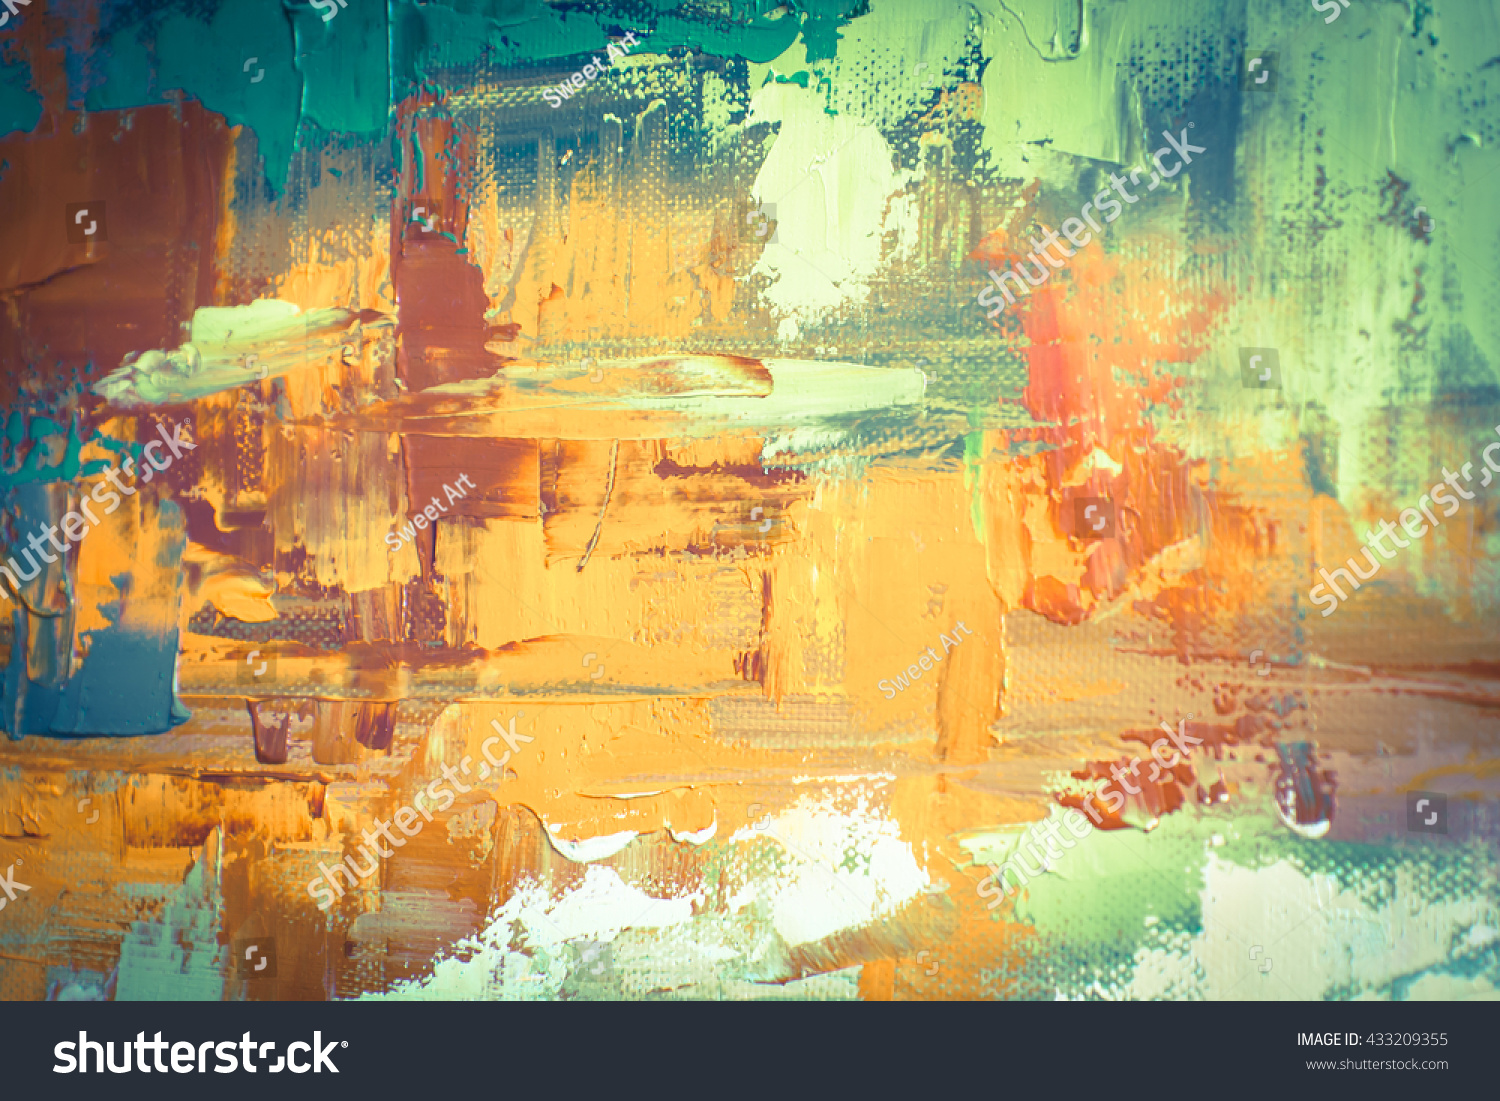 Hand Drawn Oil Painting Abstract Art Stock Illustration 433209355 ...